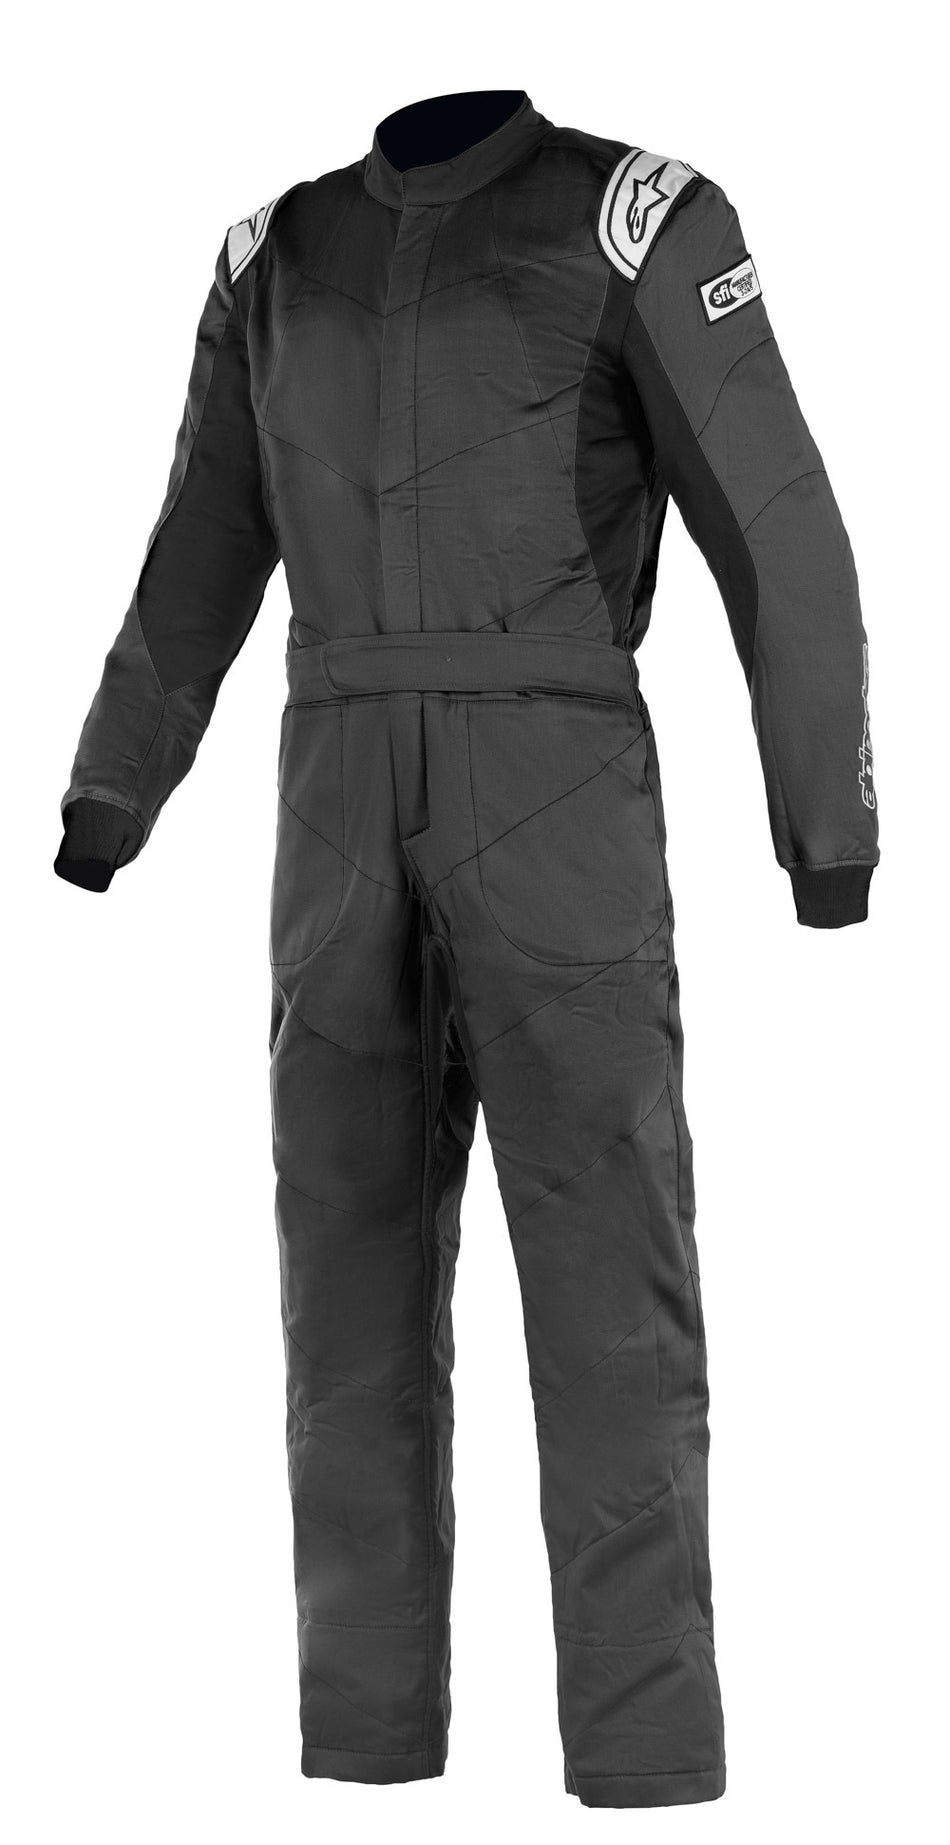 Driving Suit - Knoxville V2 - 1-Piece - SFI 3.2A/5 - Boot-Cut - Triple Layer - Fire Retardant Fabric - Black - Size 60 - X-Large - Each